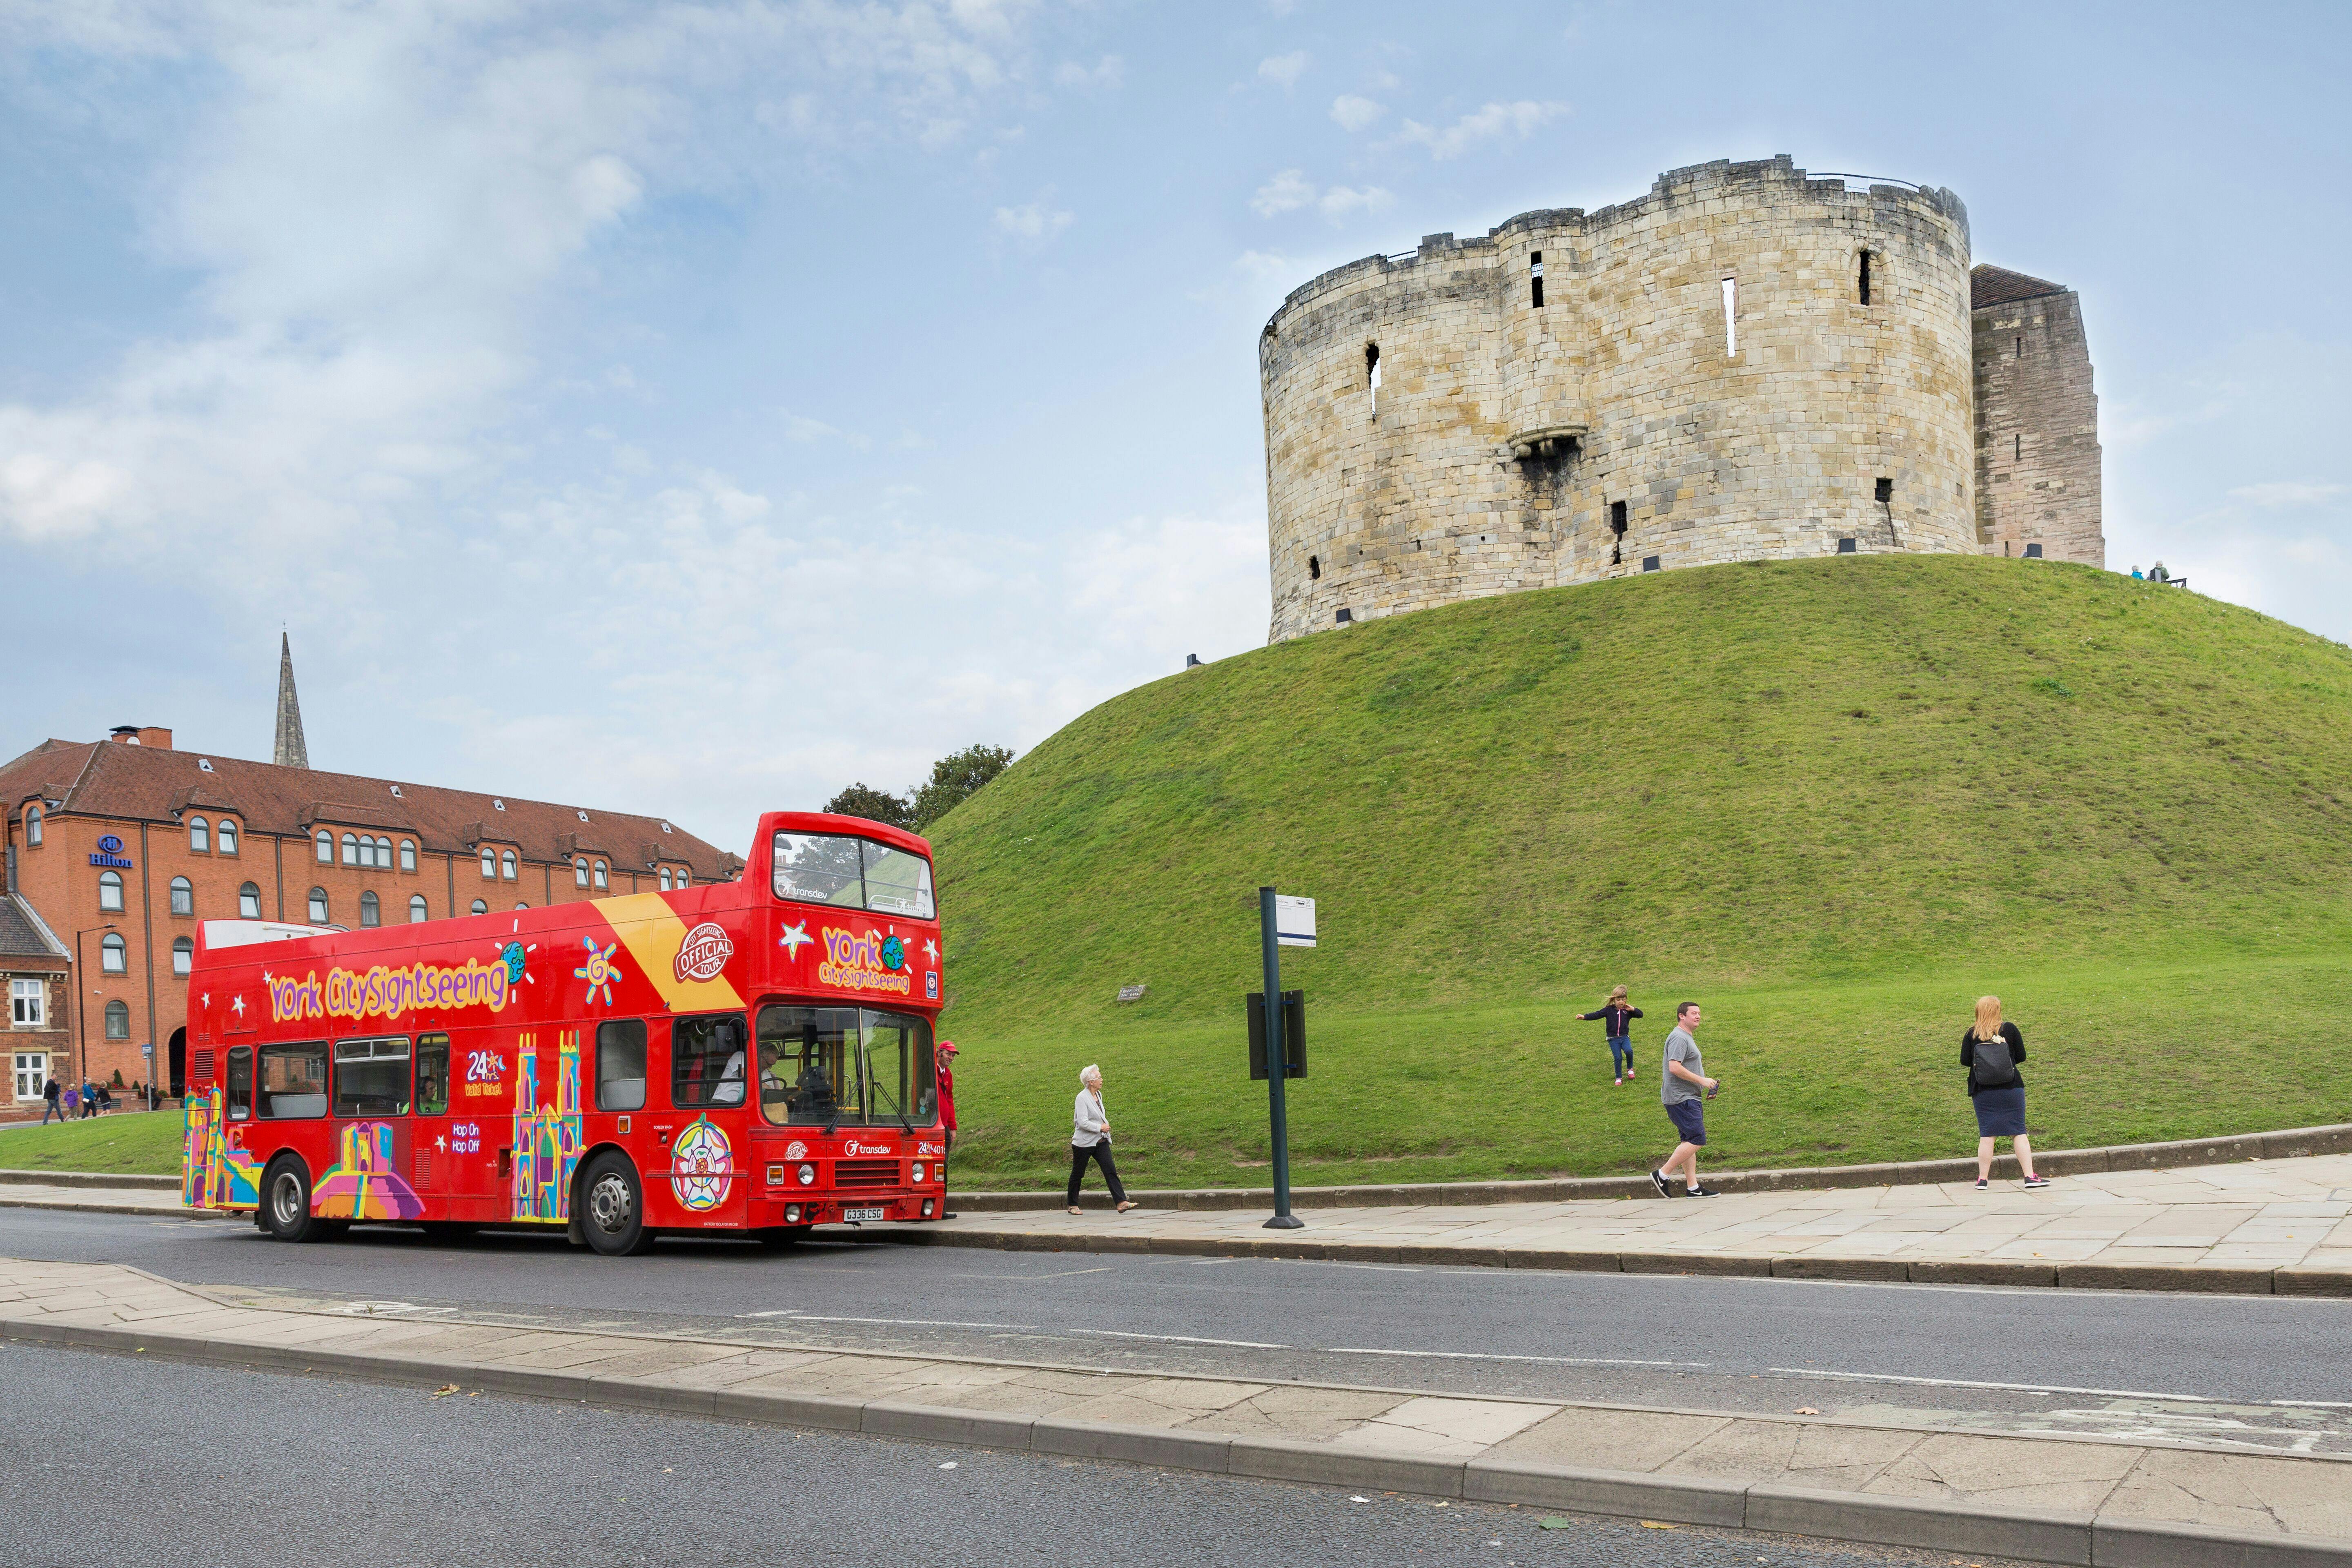 24-Stunden-Hop-on-Hop-off-City-Sightseeing-Bustour durch York